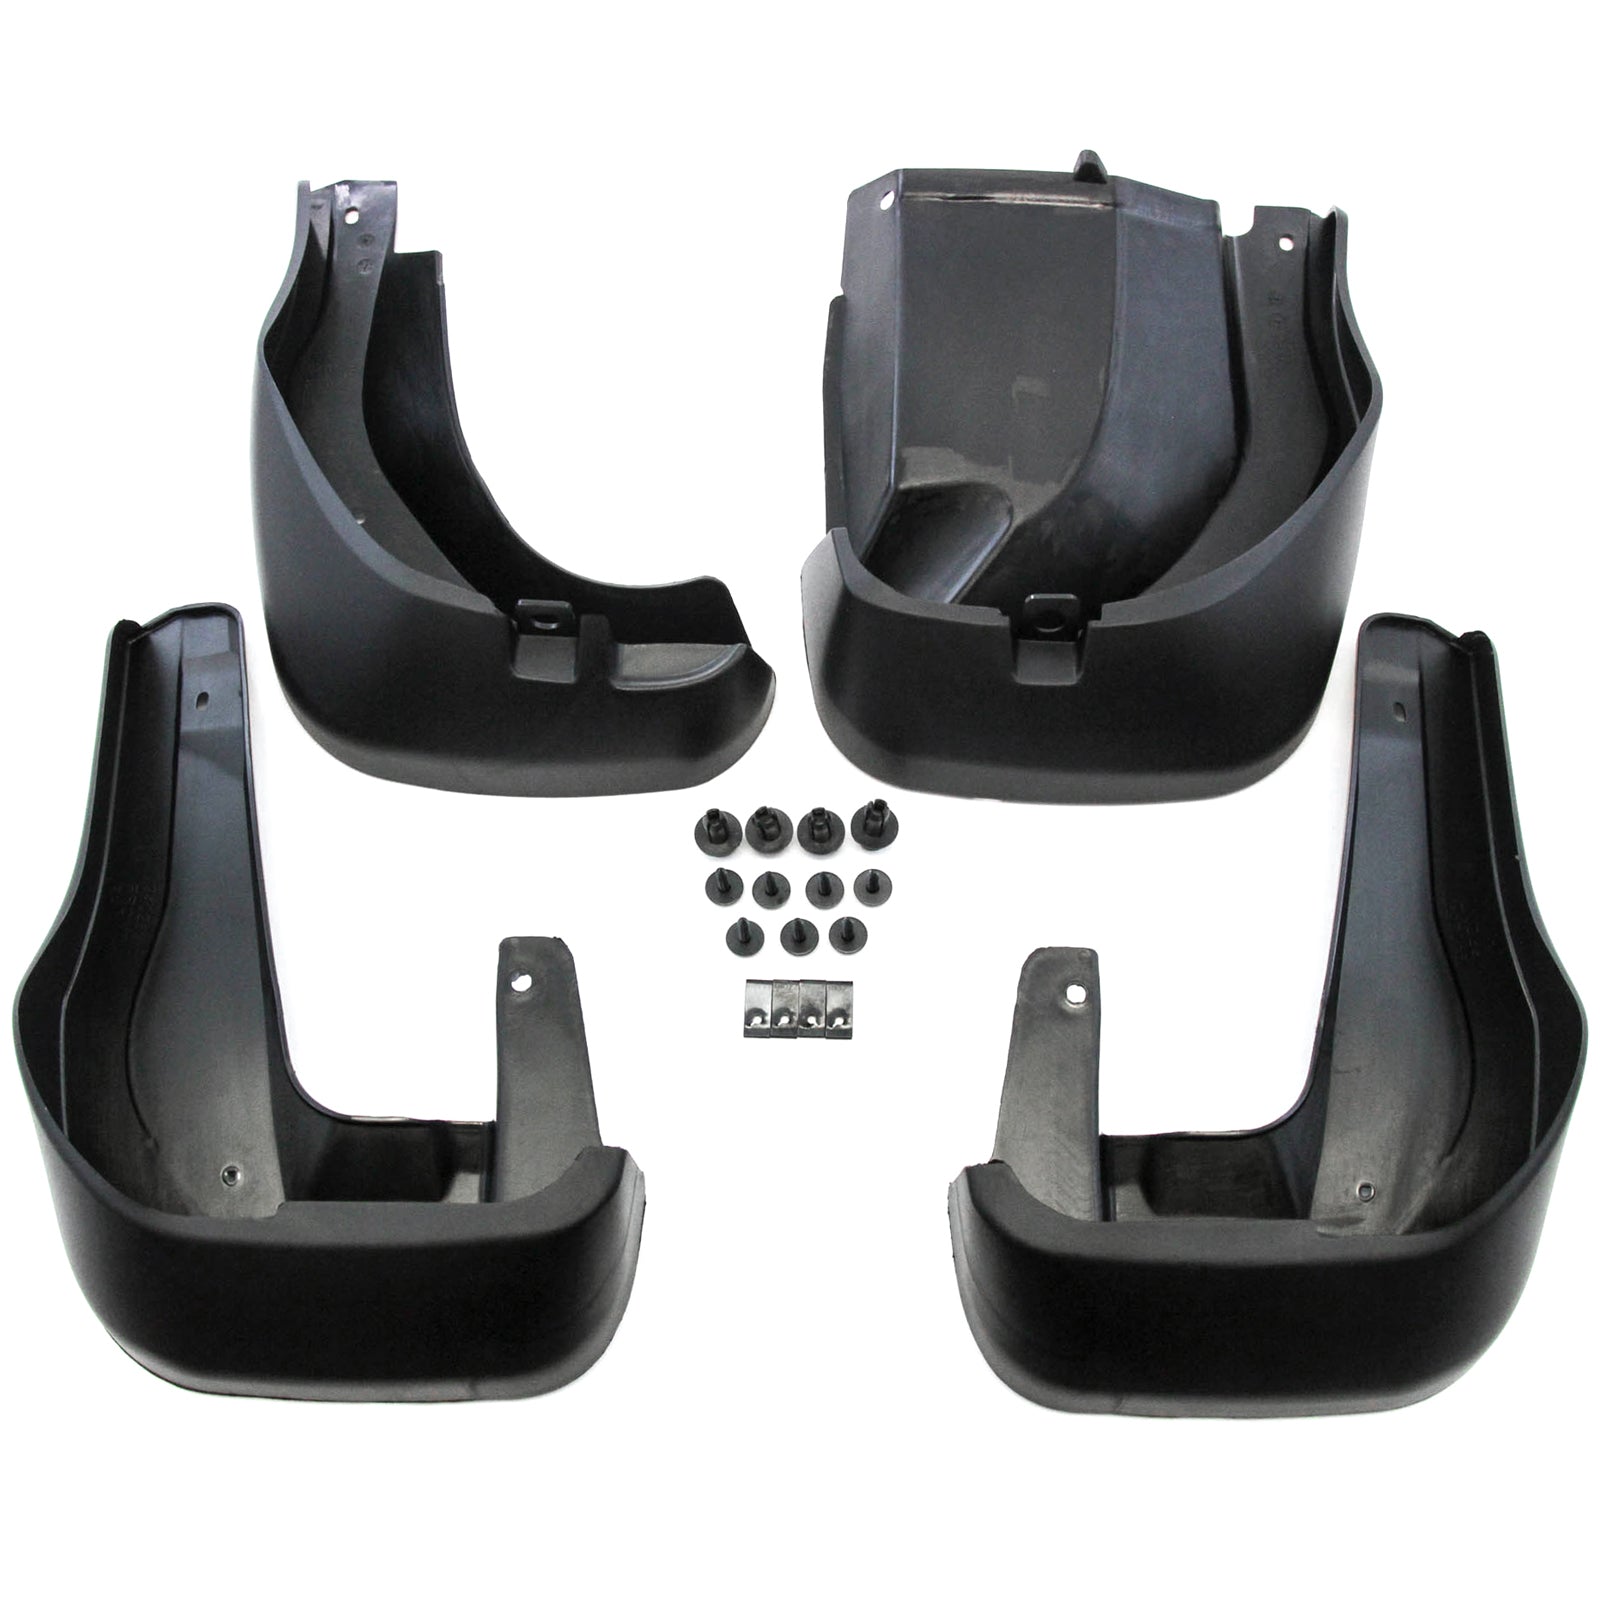 Premium Heavy Duty Molded 2012-2016 Compatible with Honda CR-V Mud Flaps Fender Guards Splash Front Rear Molded 4pc Set